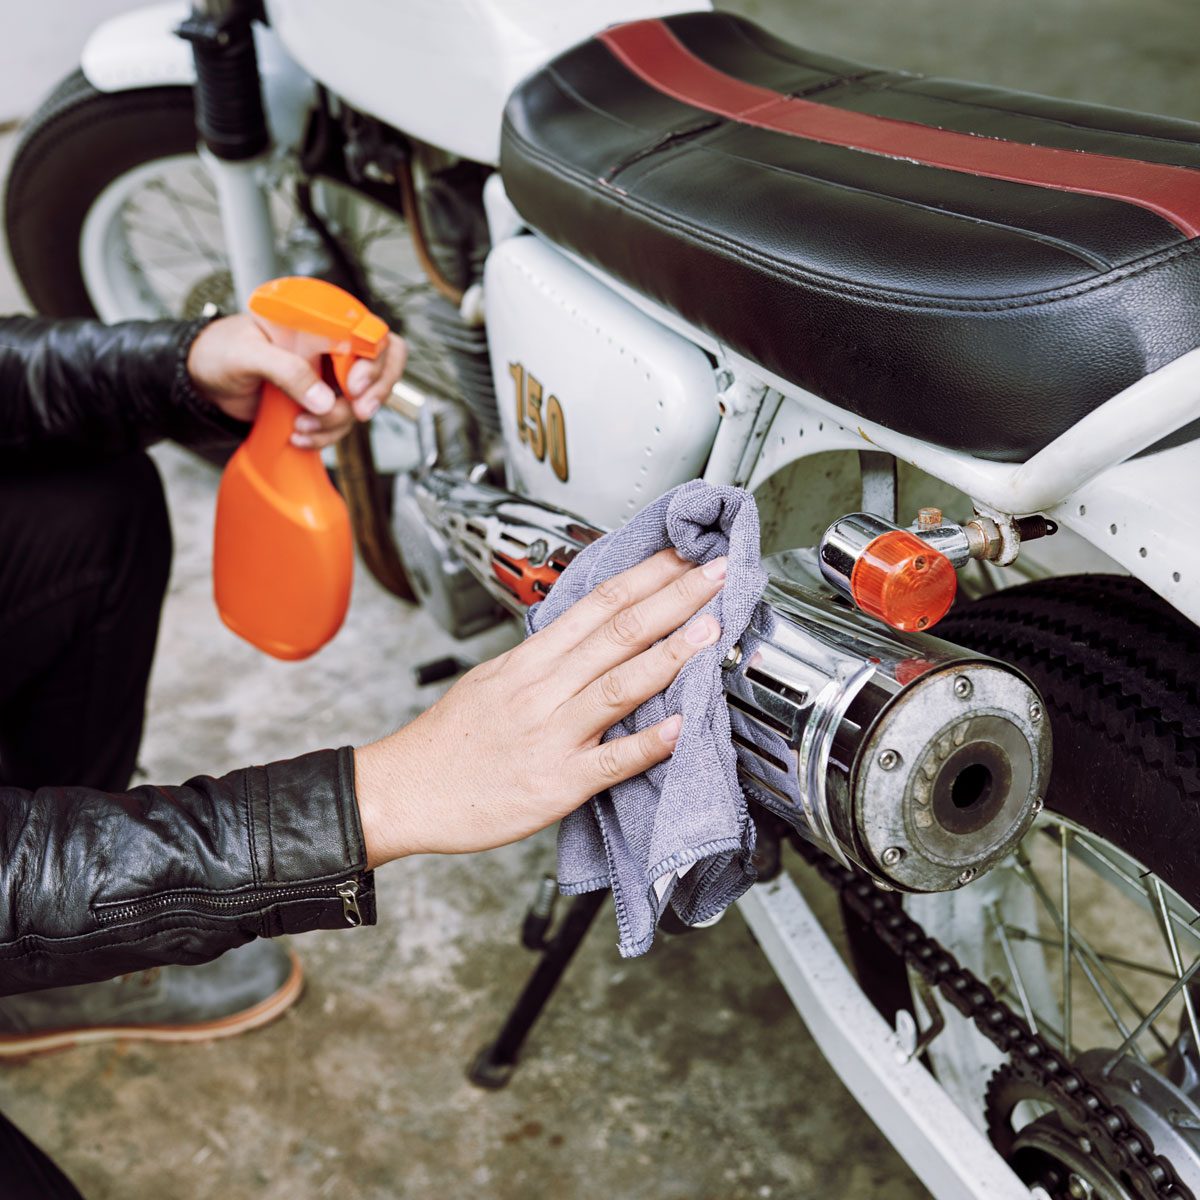 Motorcycle Detailing Tips from Hunter Detail